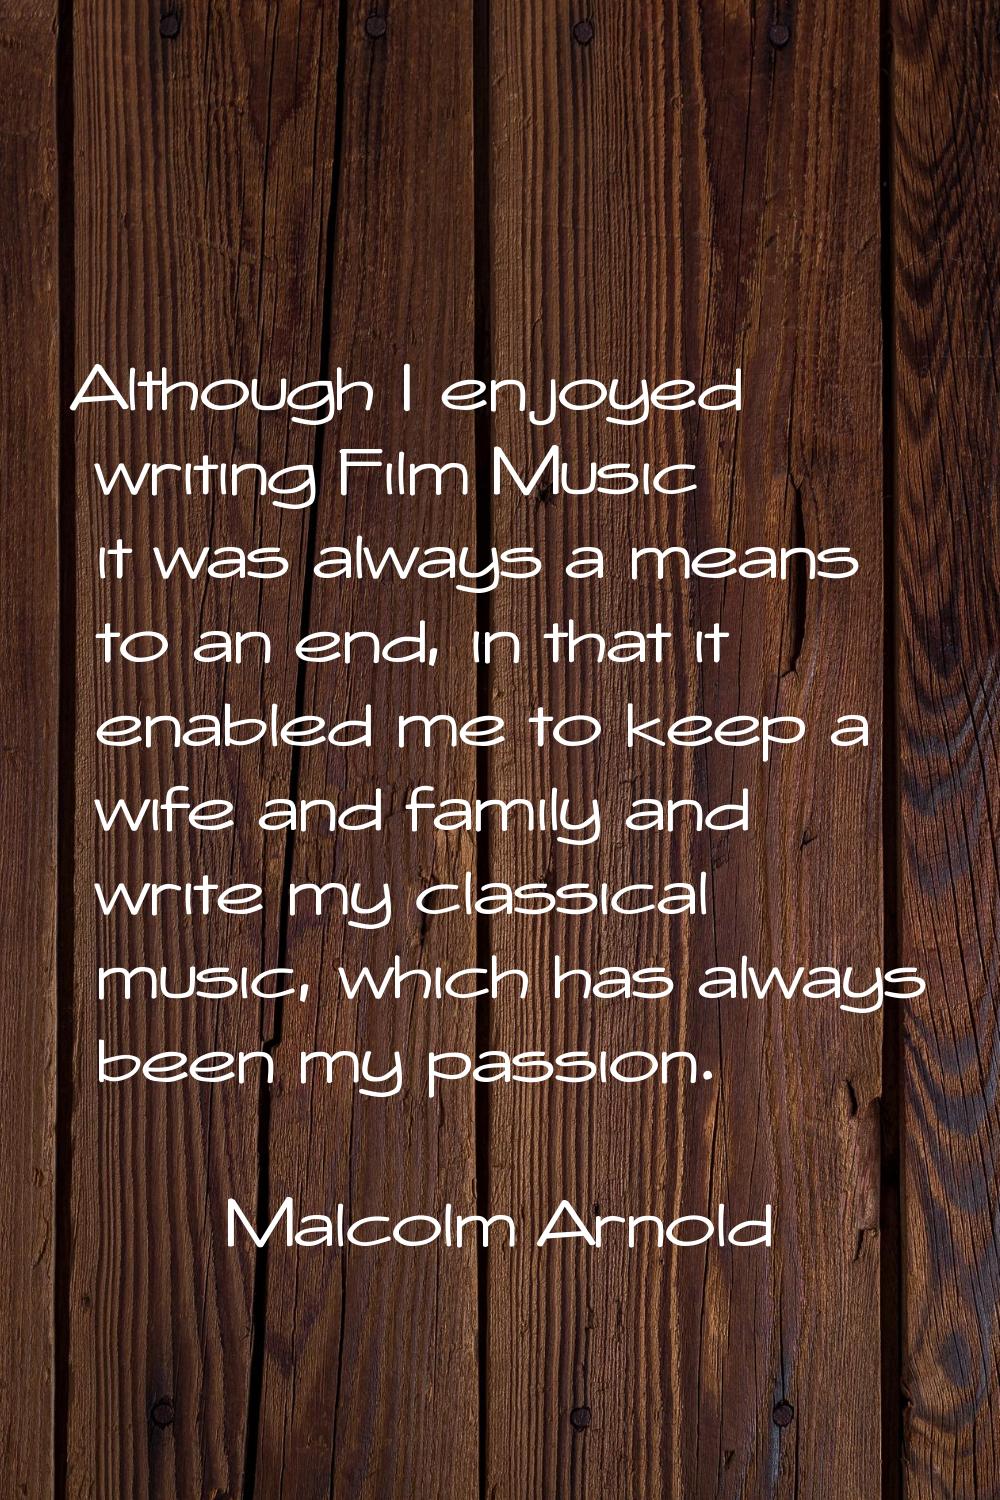 Although I enjoyed writing Film Music it was always a means to an end, in that it enabled me to kee